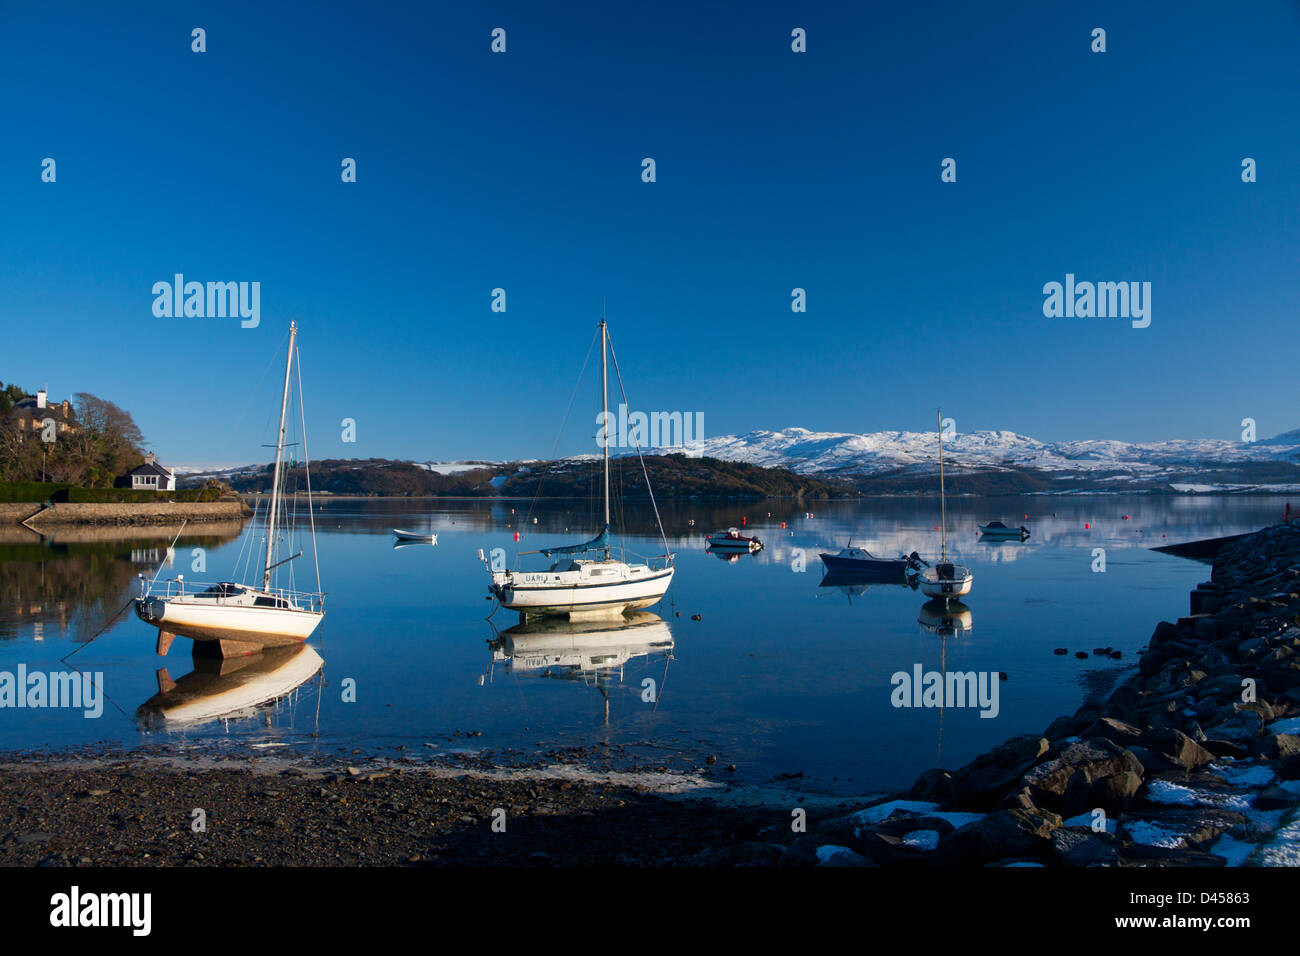 Boats in Borth-y-Gest harbour in winter with snow on mountains in distance Stock Photo